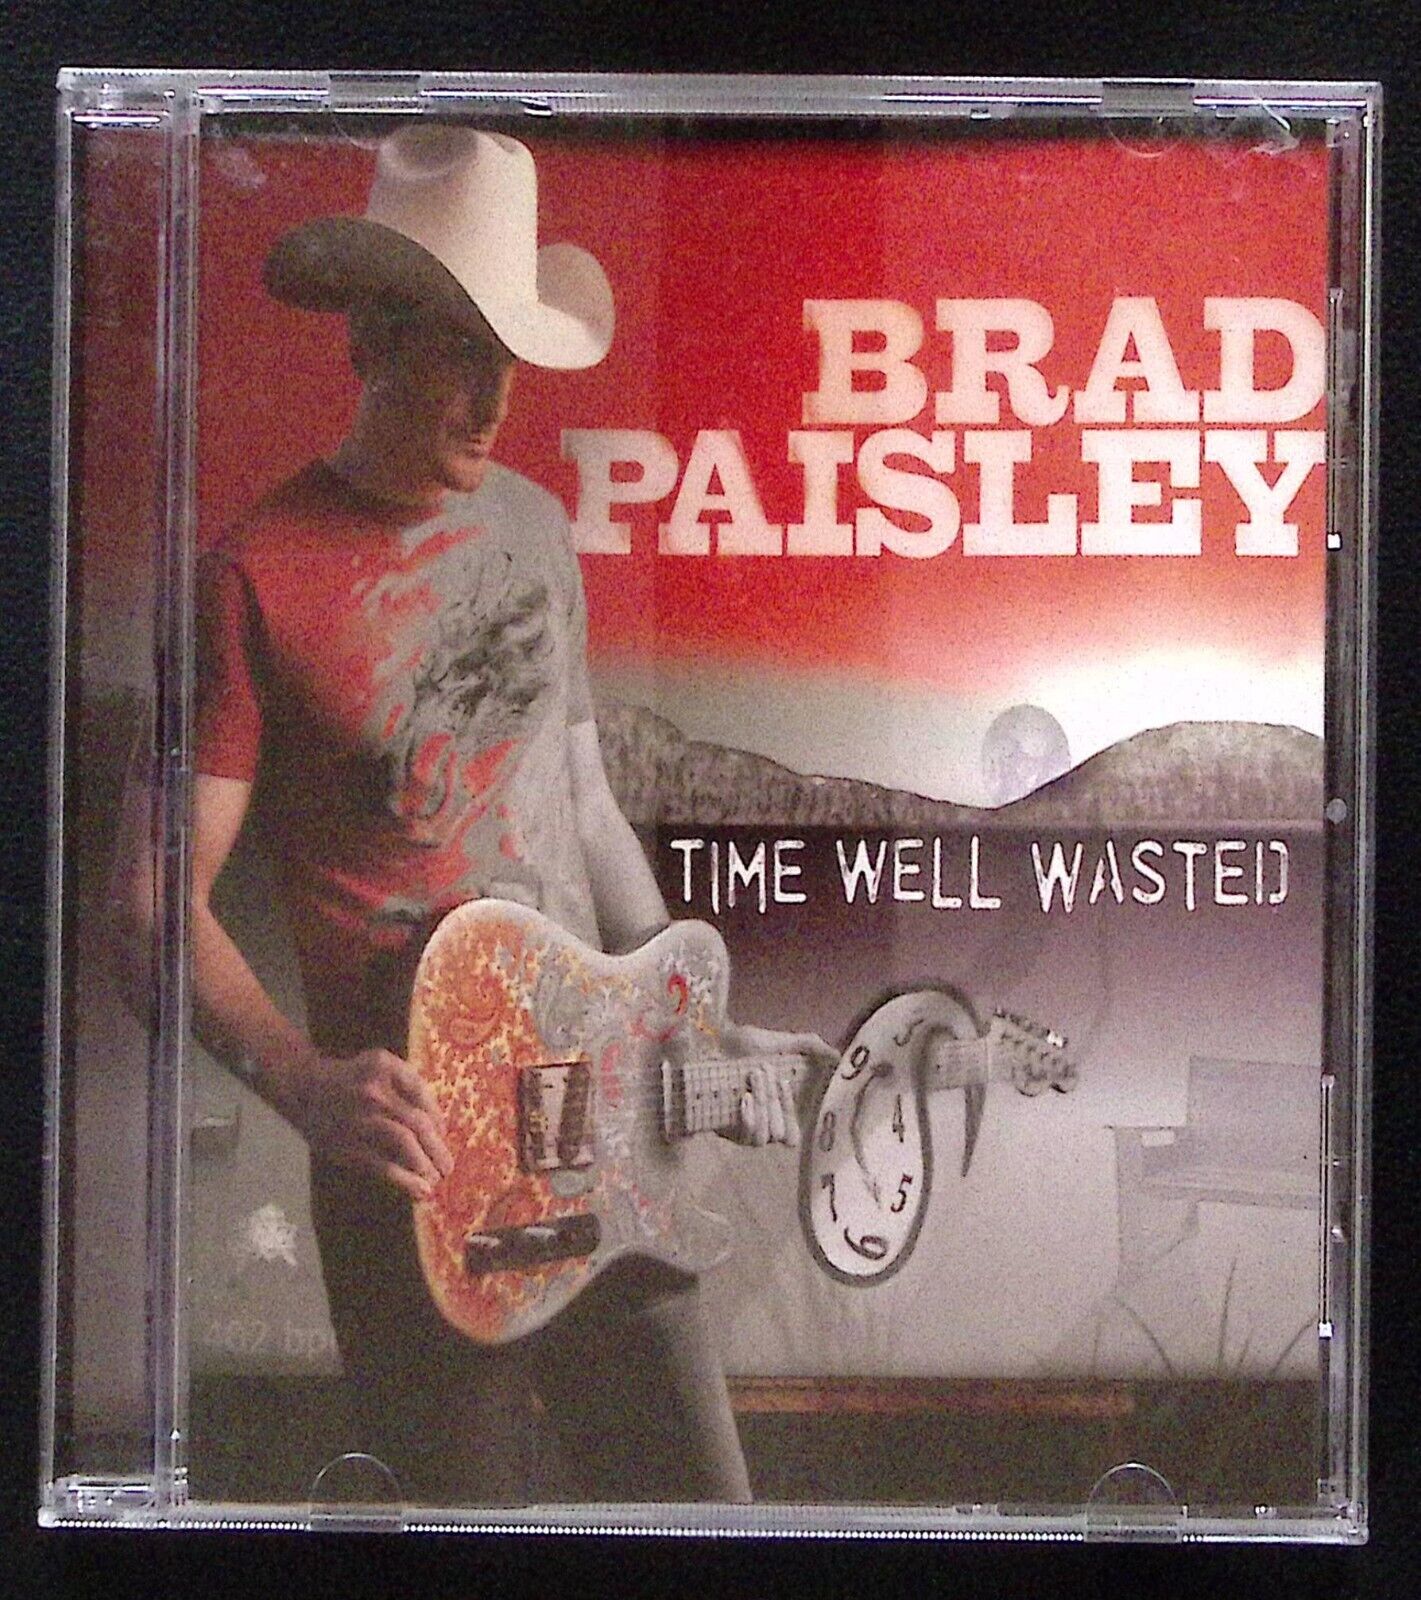 BRAD PAISLEY  TIME WELL WASTED  ARISTA RECORDS  CD 1515